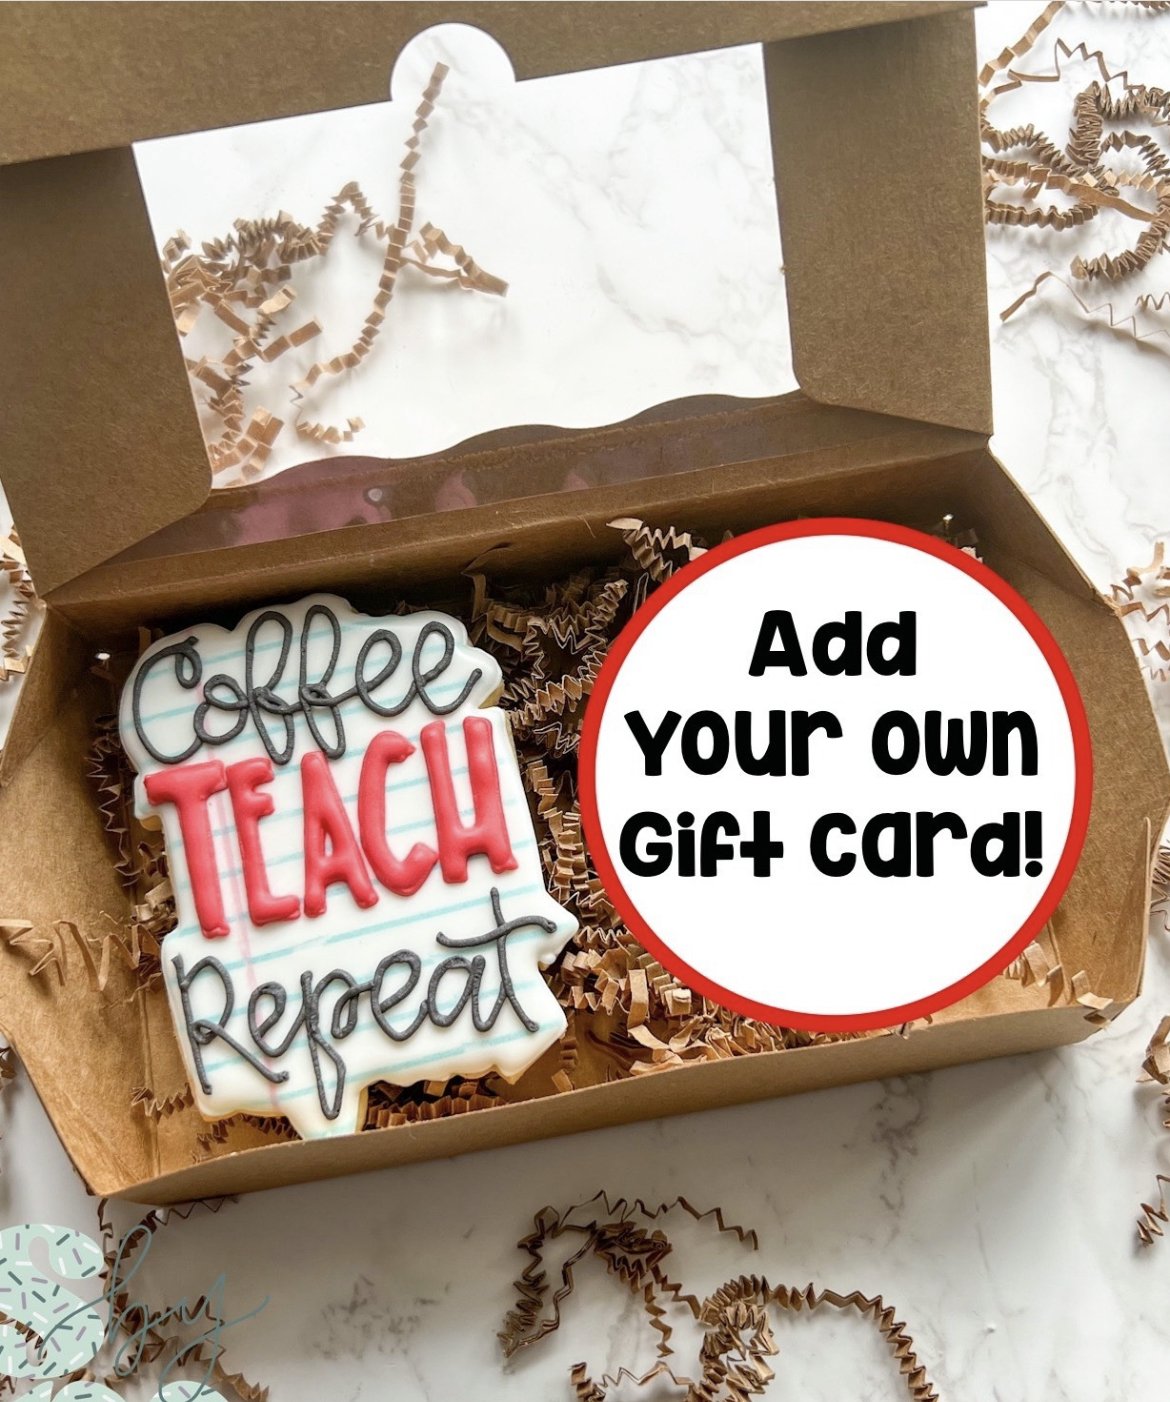 ☕ Teachers deserve all the credit + appreciation! Give them something sweet plus a gift card for Teacher Appreciation week (May 6-10)! Place you pre-order today!☕
&bull;
Link to pre-order is in my bio
&bull;
🇮🇱 My heart is always with the people of